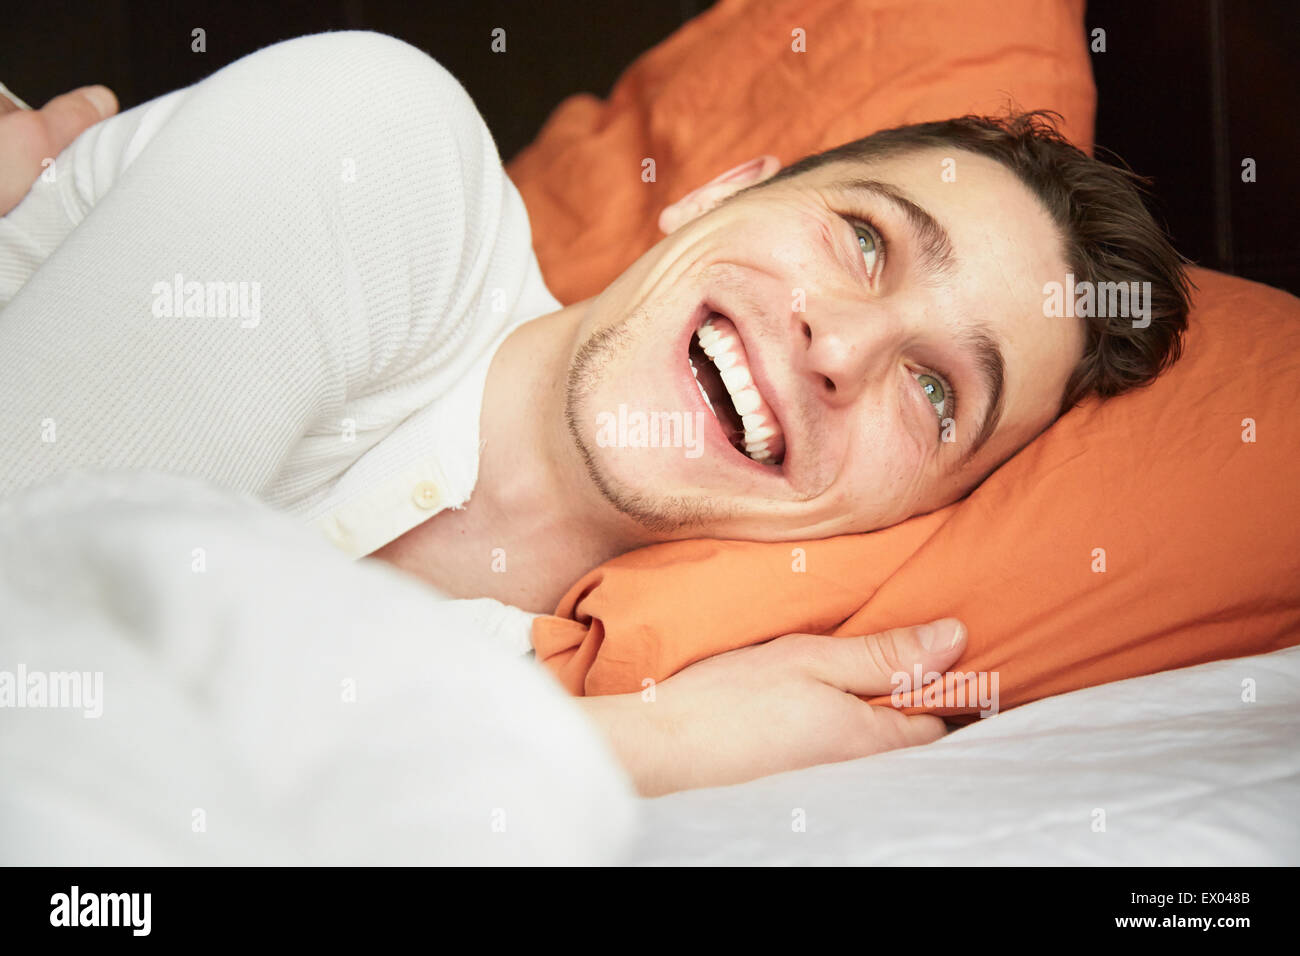 Close up of young man lying in bed and laughing Stock Photo